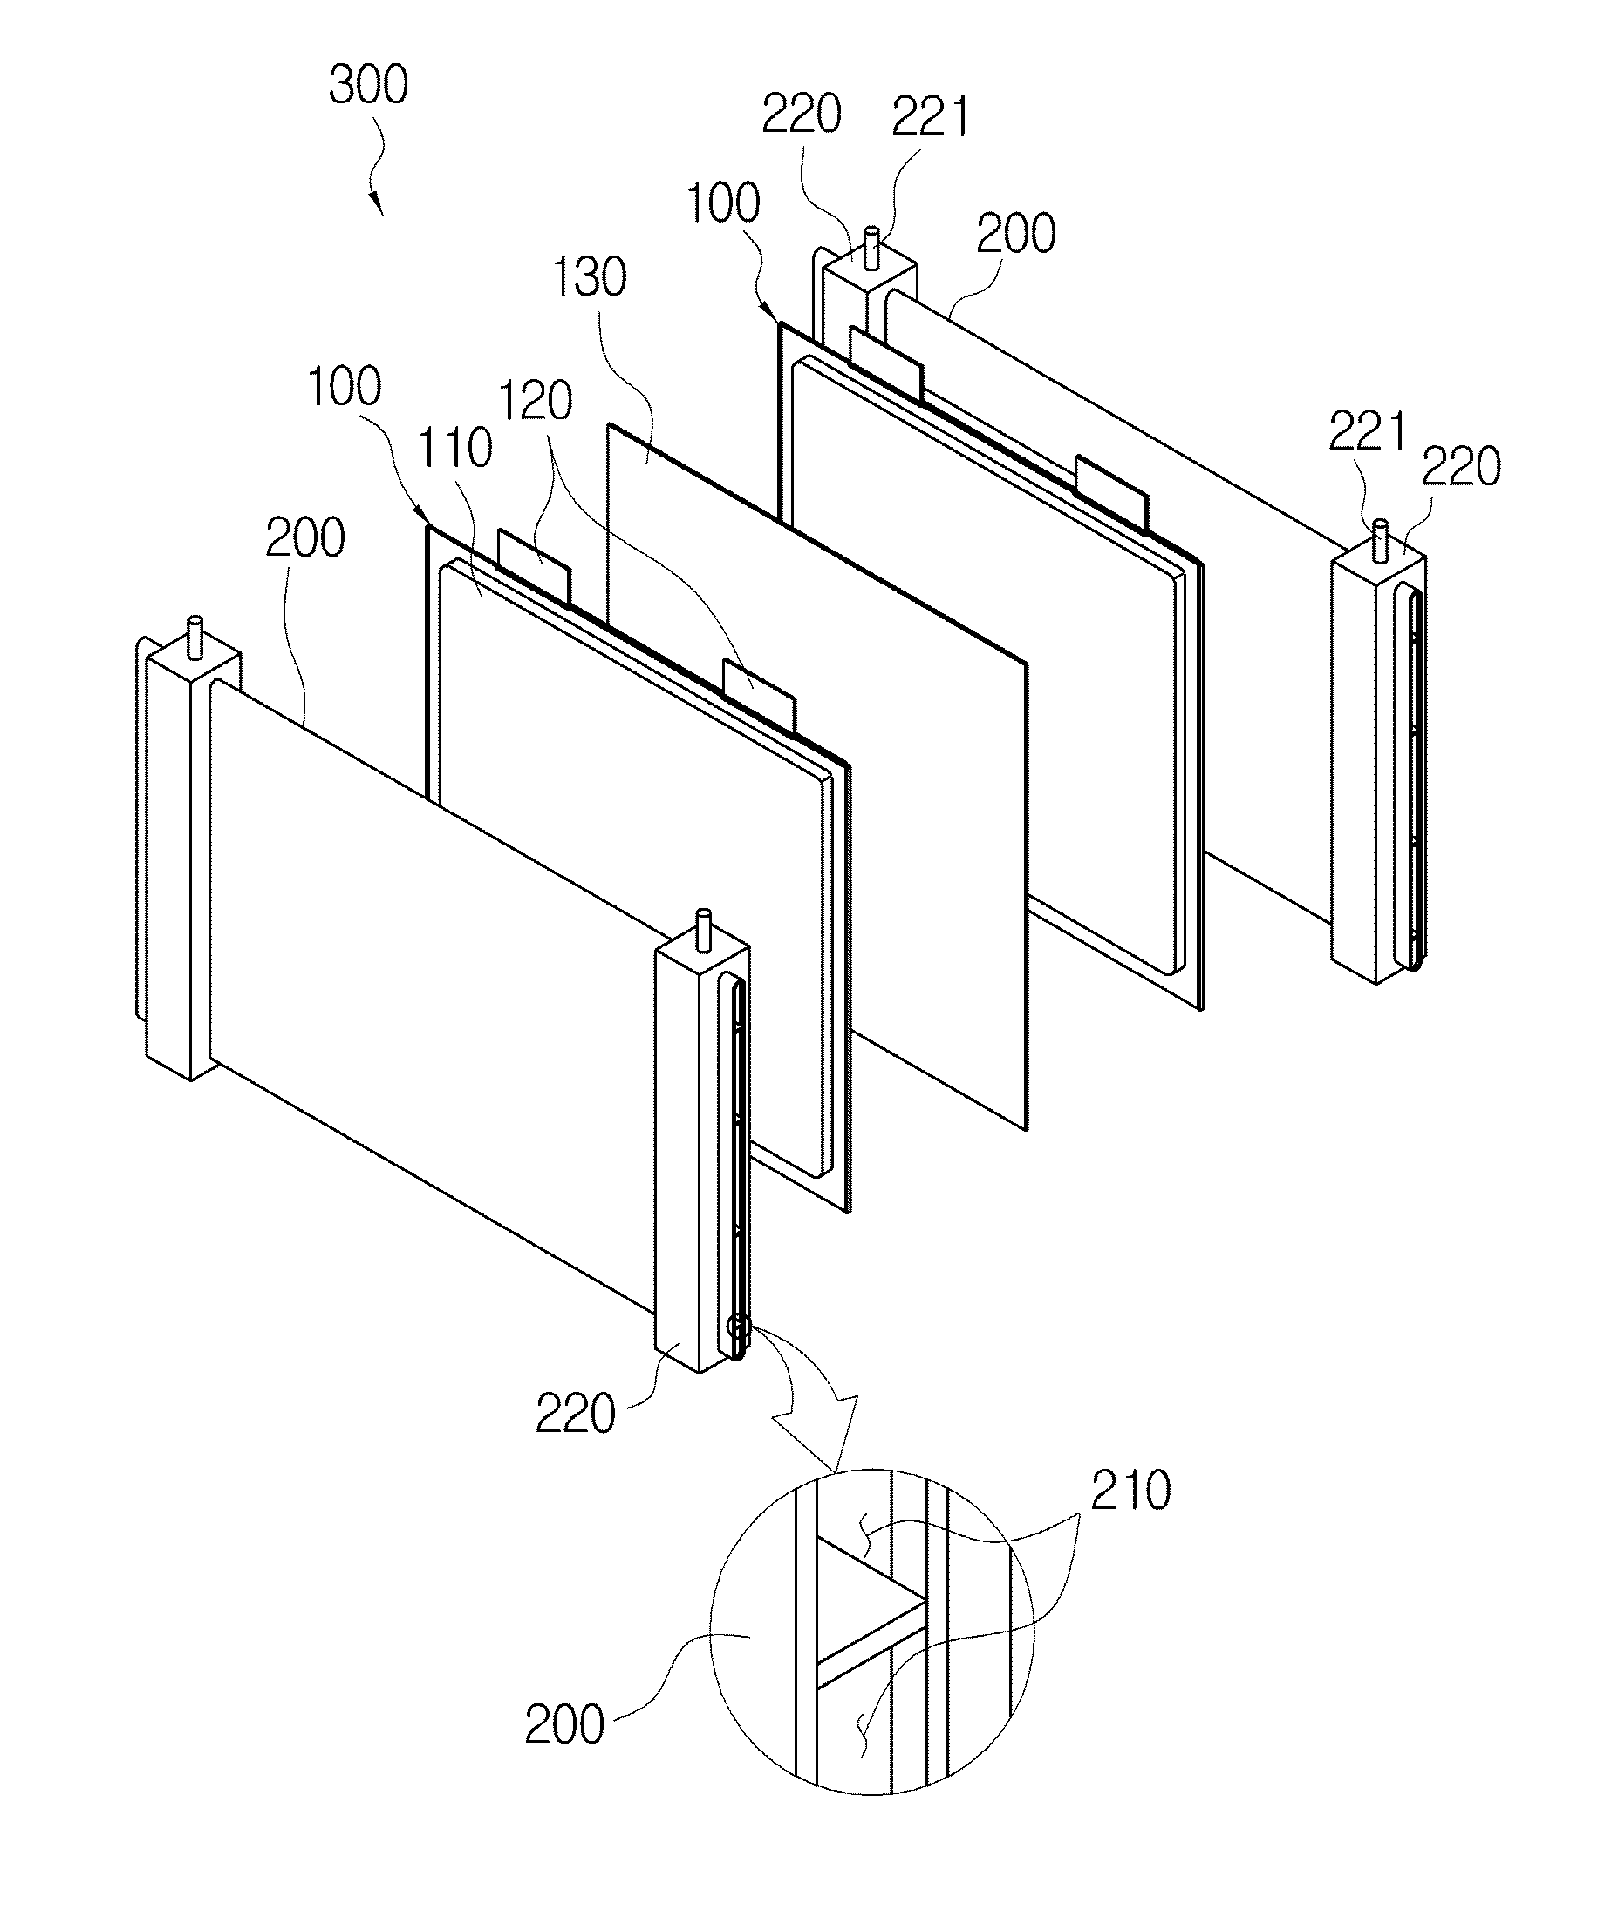 Secondary battery module having through type cool channel